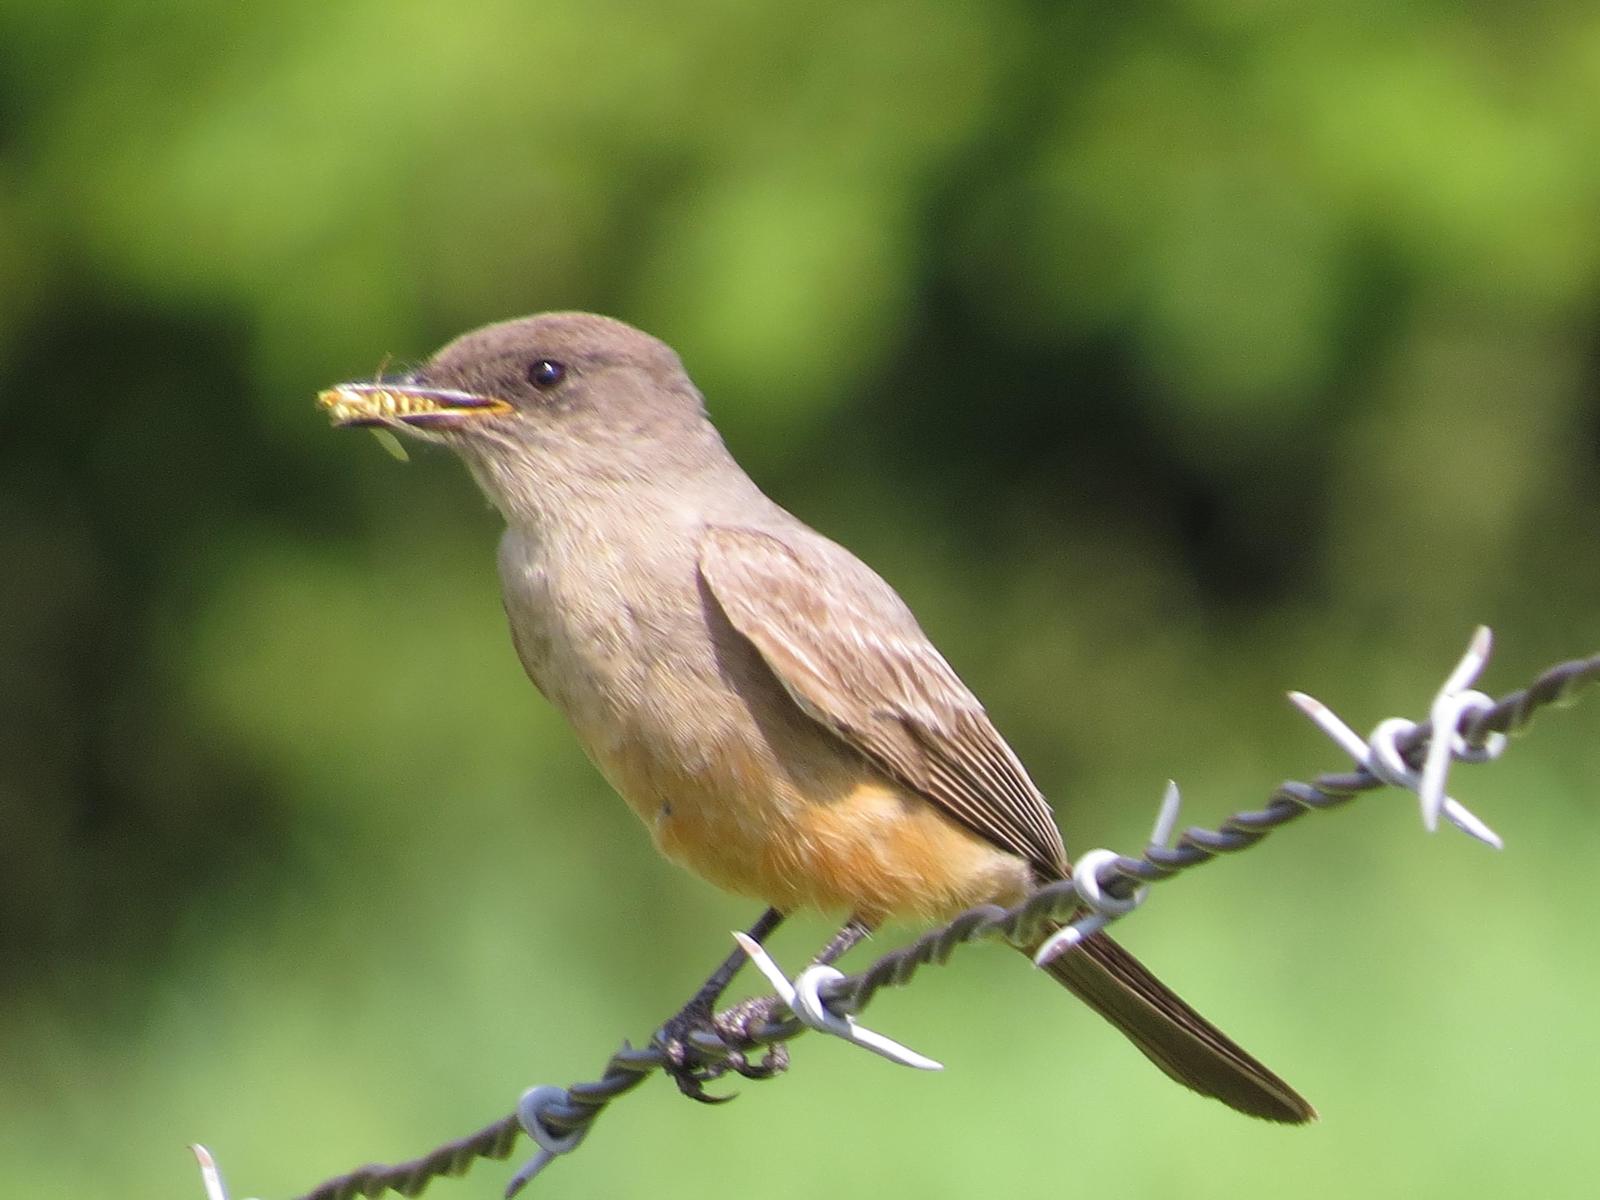 Say's Phoebe Photo by Enid Bachman